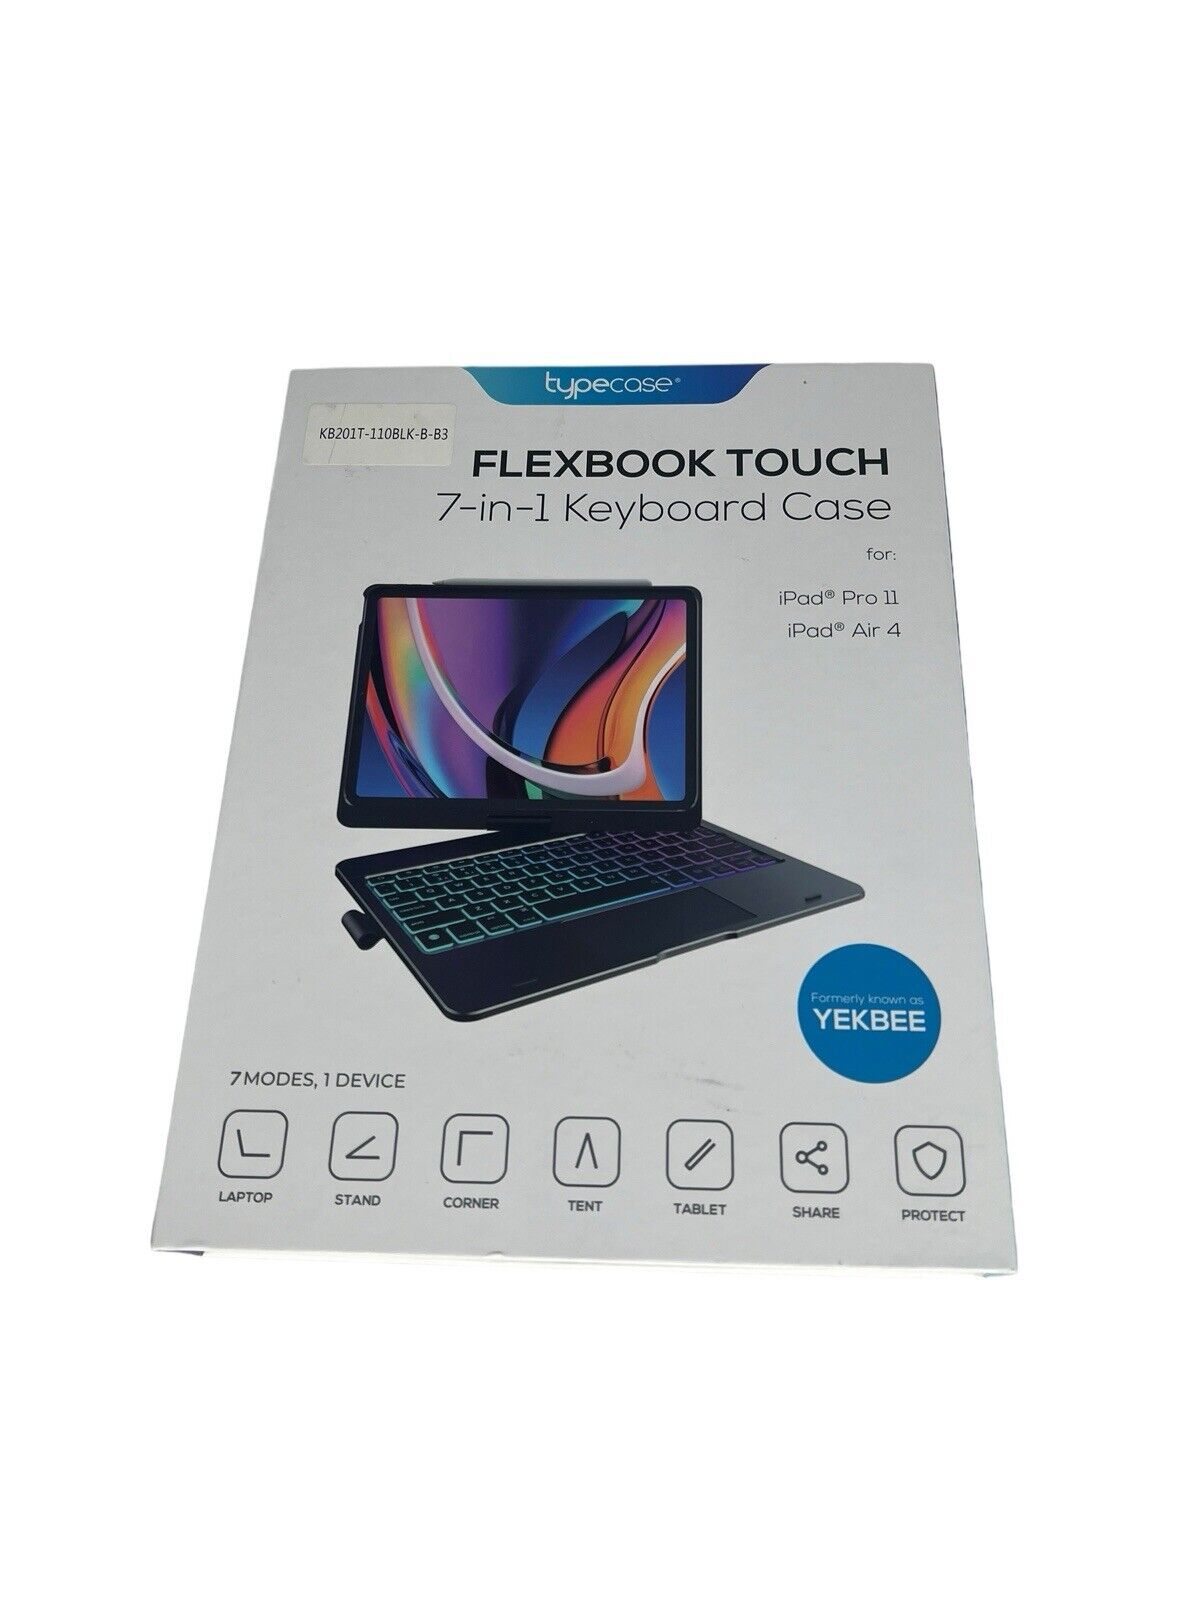 Typecase Flexbook Touch 7 in 1 Keyboard Case For iPad Pro 12.9